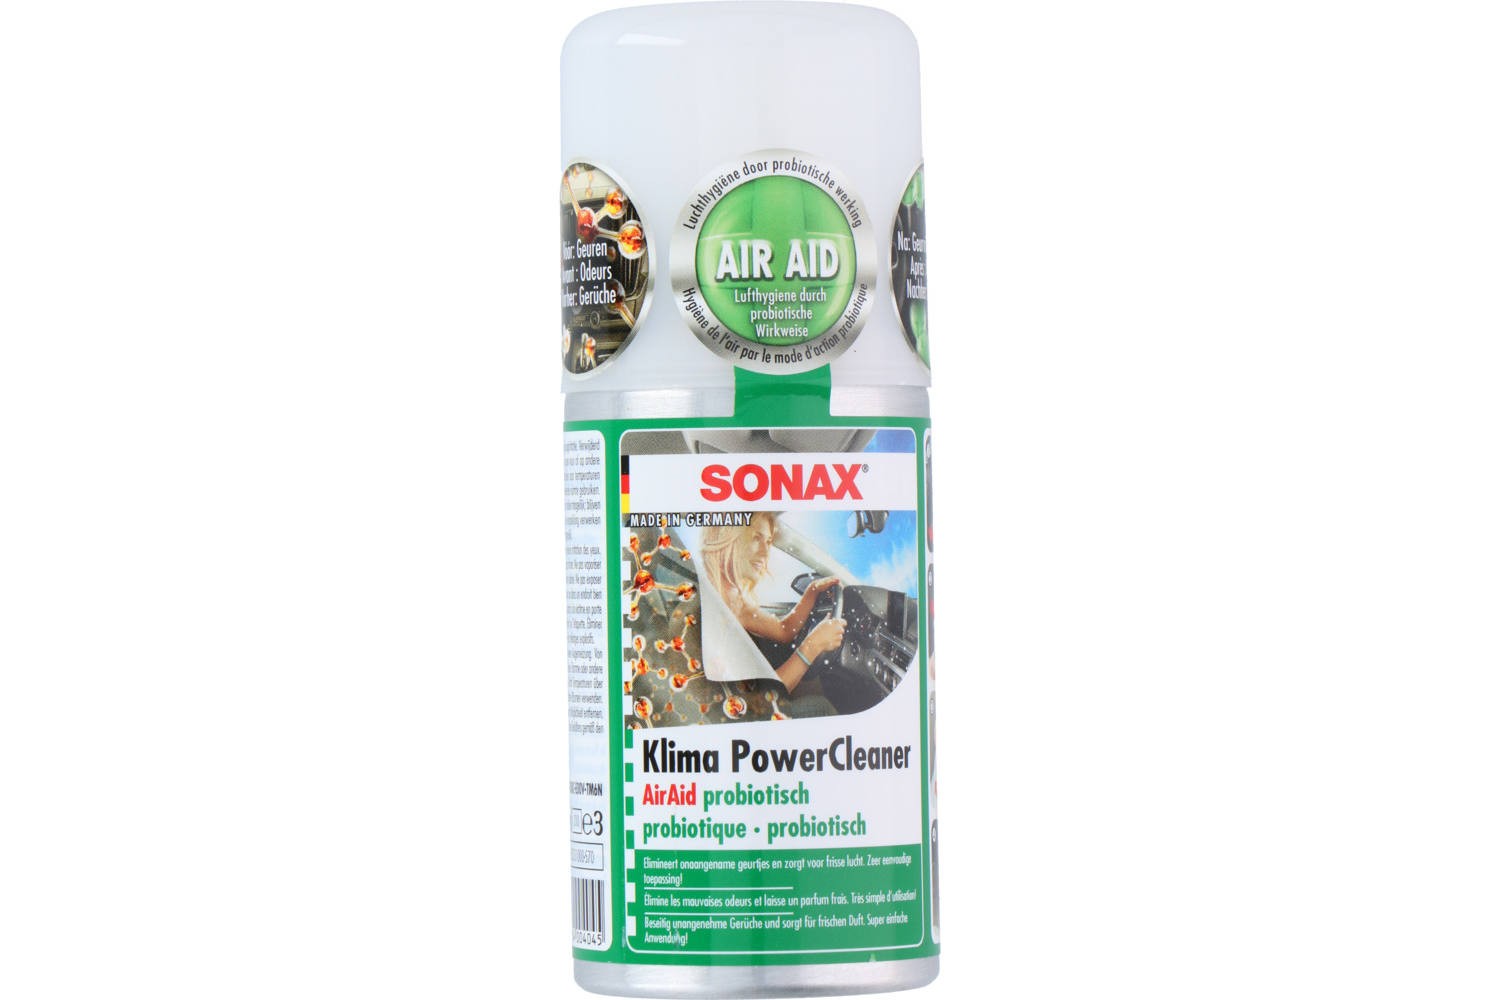 https://www.auto-service.be/assets/media/16192/sonax-klima-powercleaner-airconditioning-cleaner-100ml-111449.jpg